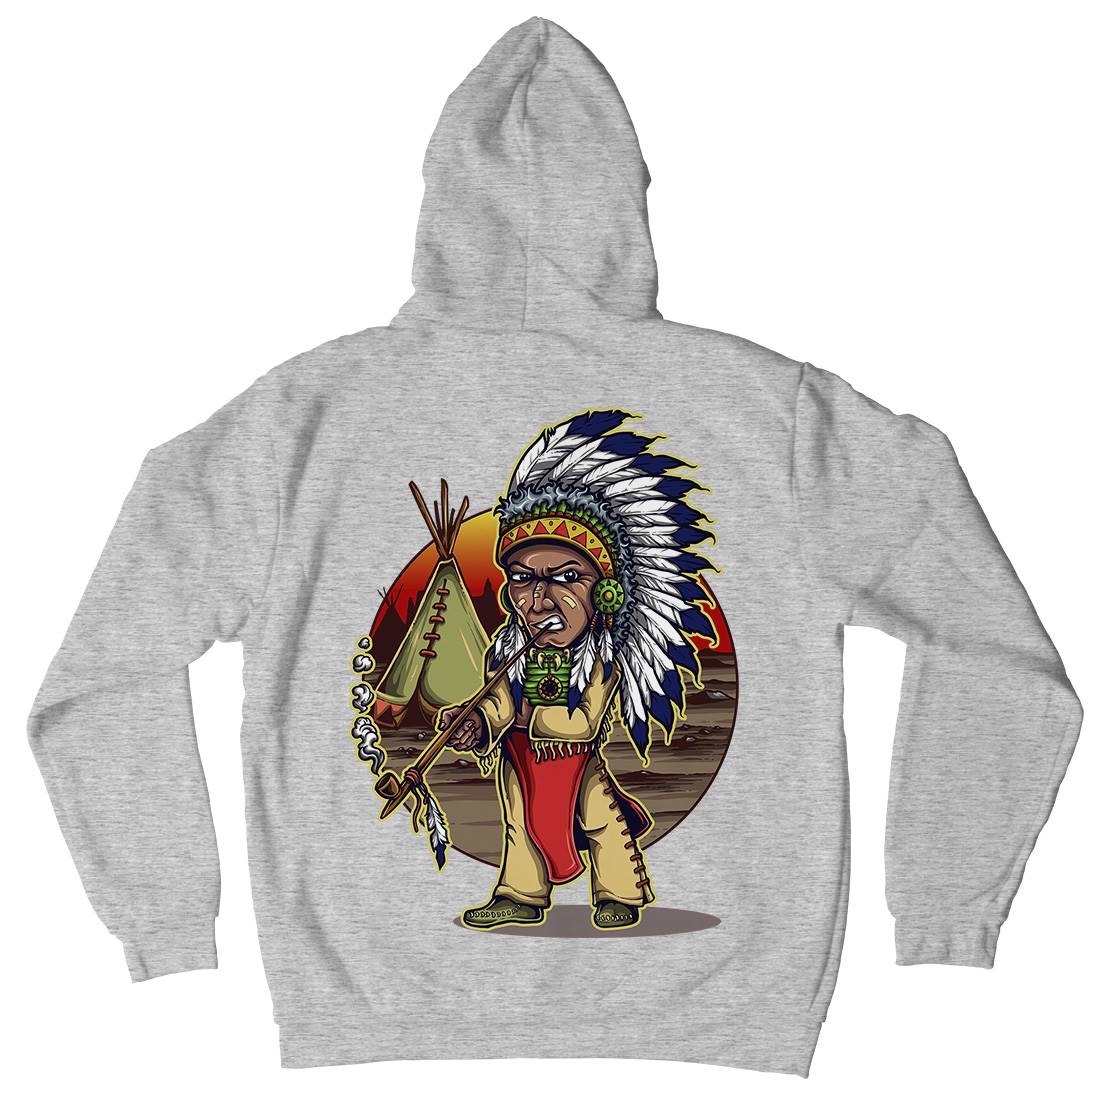 Native Chieftain Kids Crew Neck Hoodie Motorcycles A442